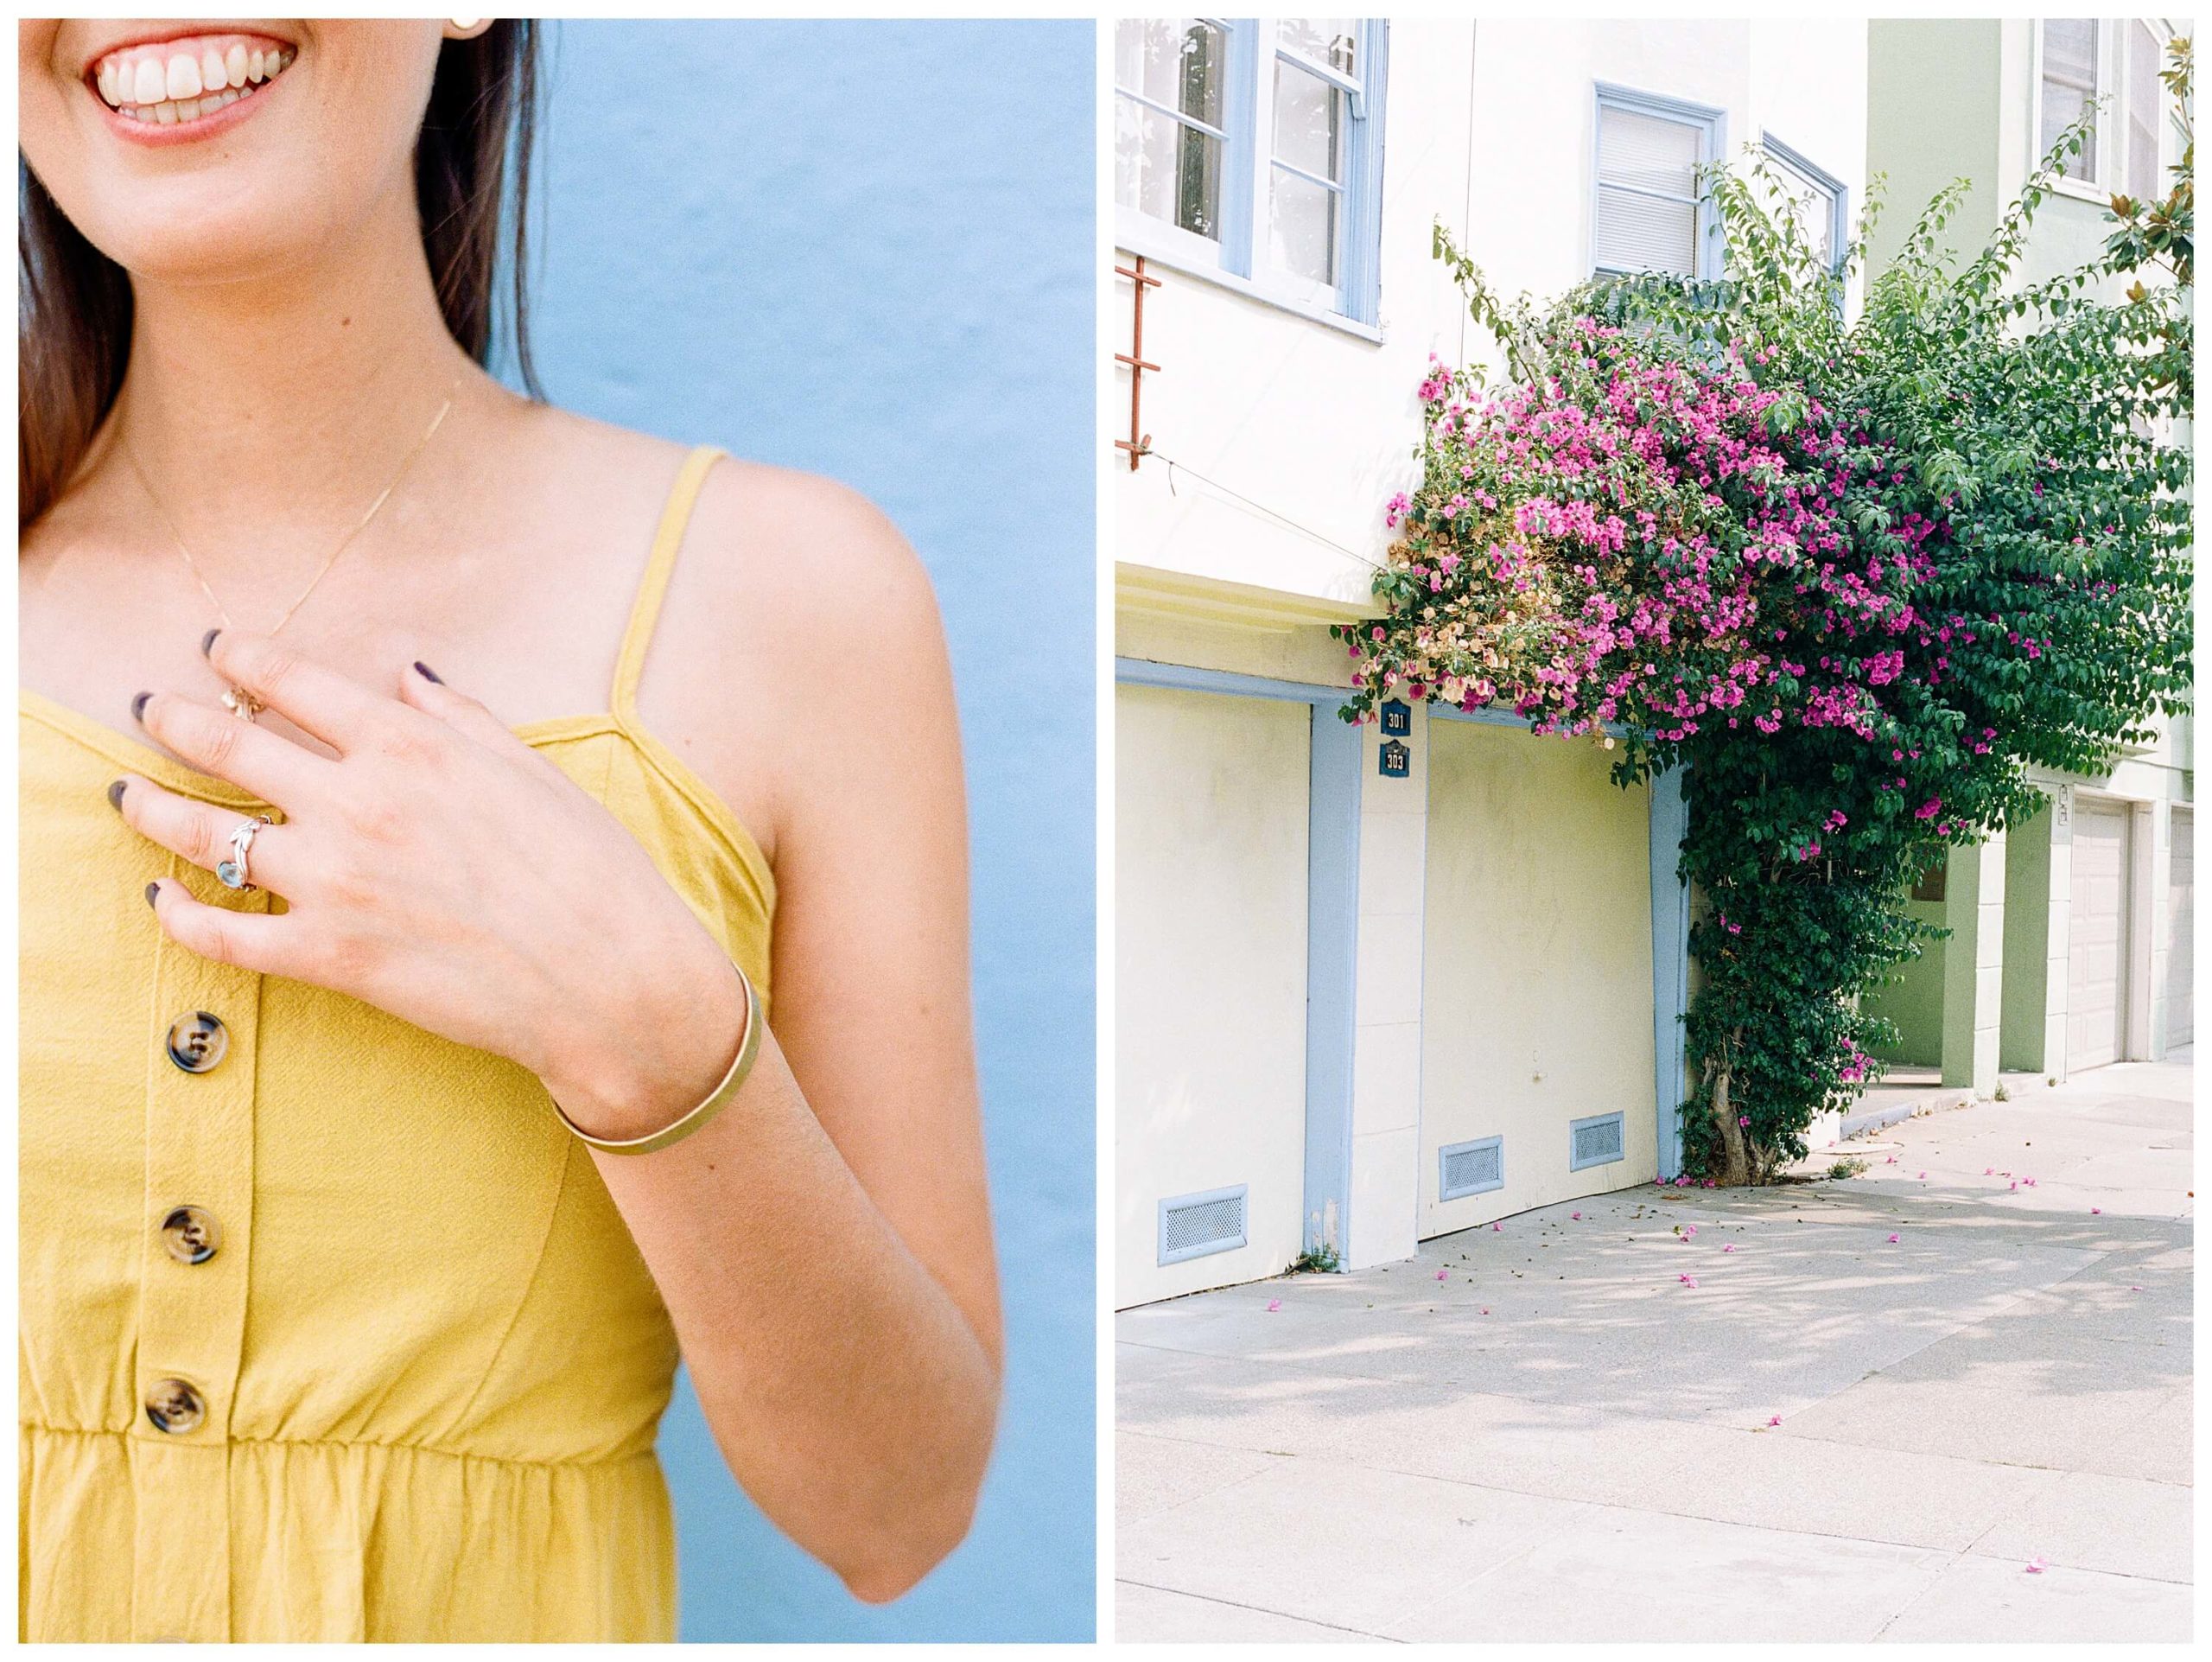 Left: A girl in a yellow dress gently rests her left hand on her chest so that the viewer can see her blue ring, which matches the blue wall behind her. Right: An abundance of purple flowers overflows from the vines over a garage in San Francisco.